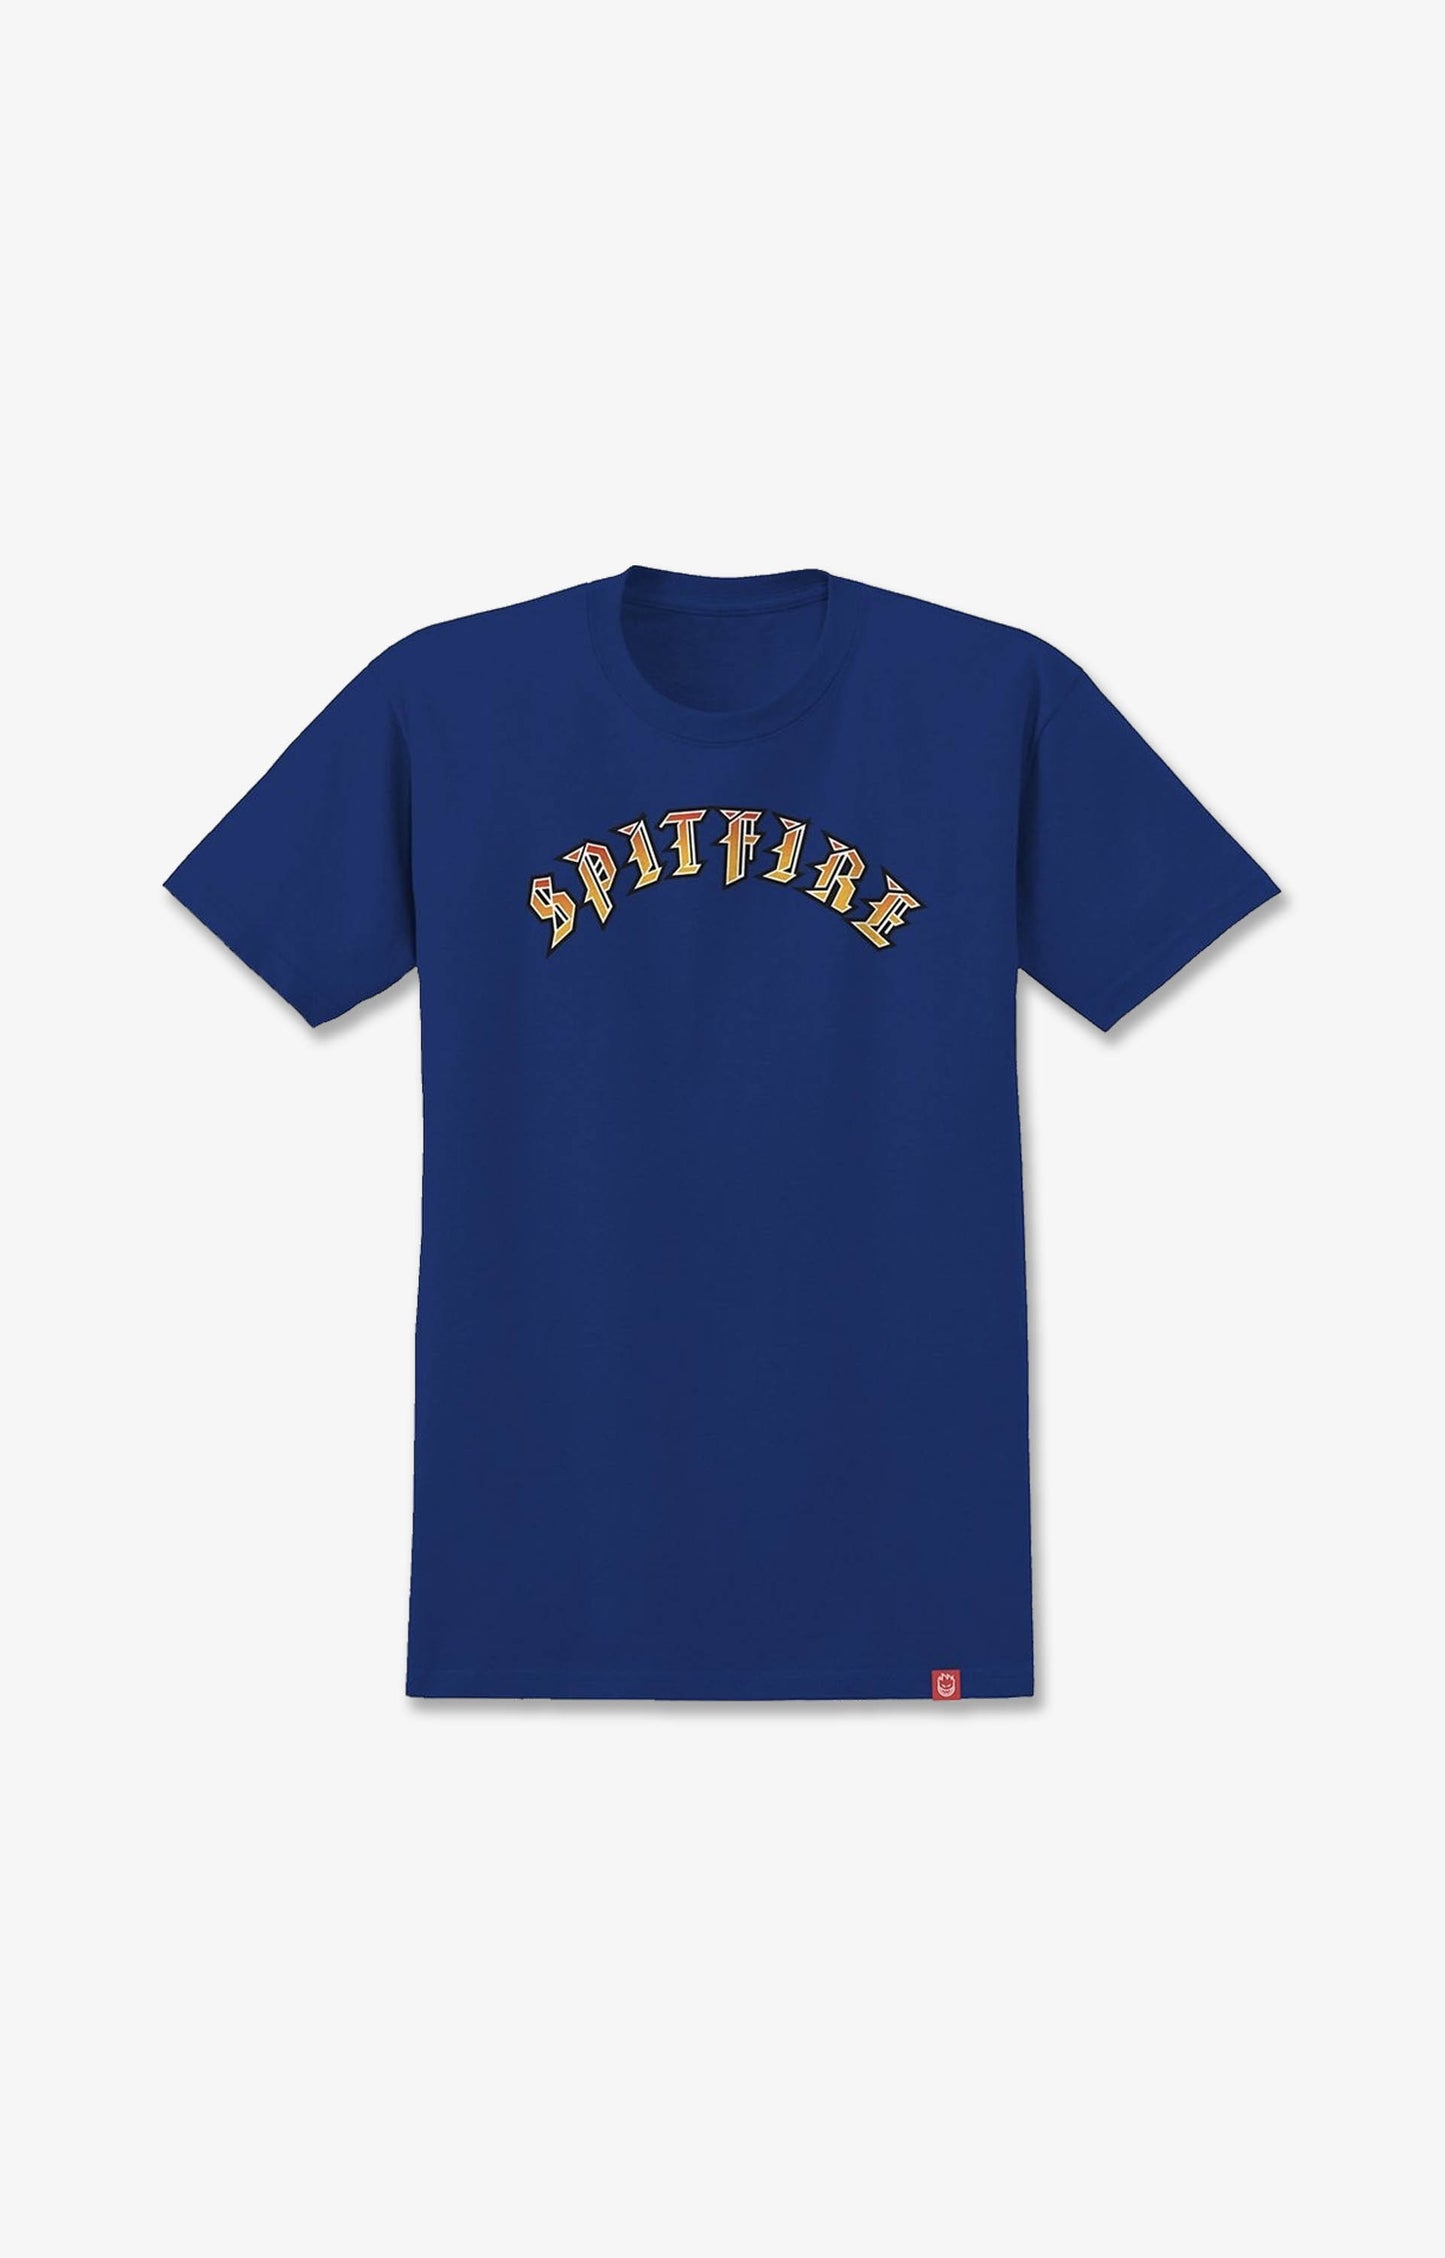 Spitfire Old E Youth T-Shirt, Royal